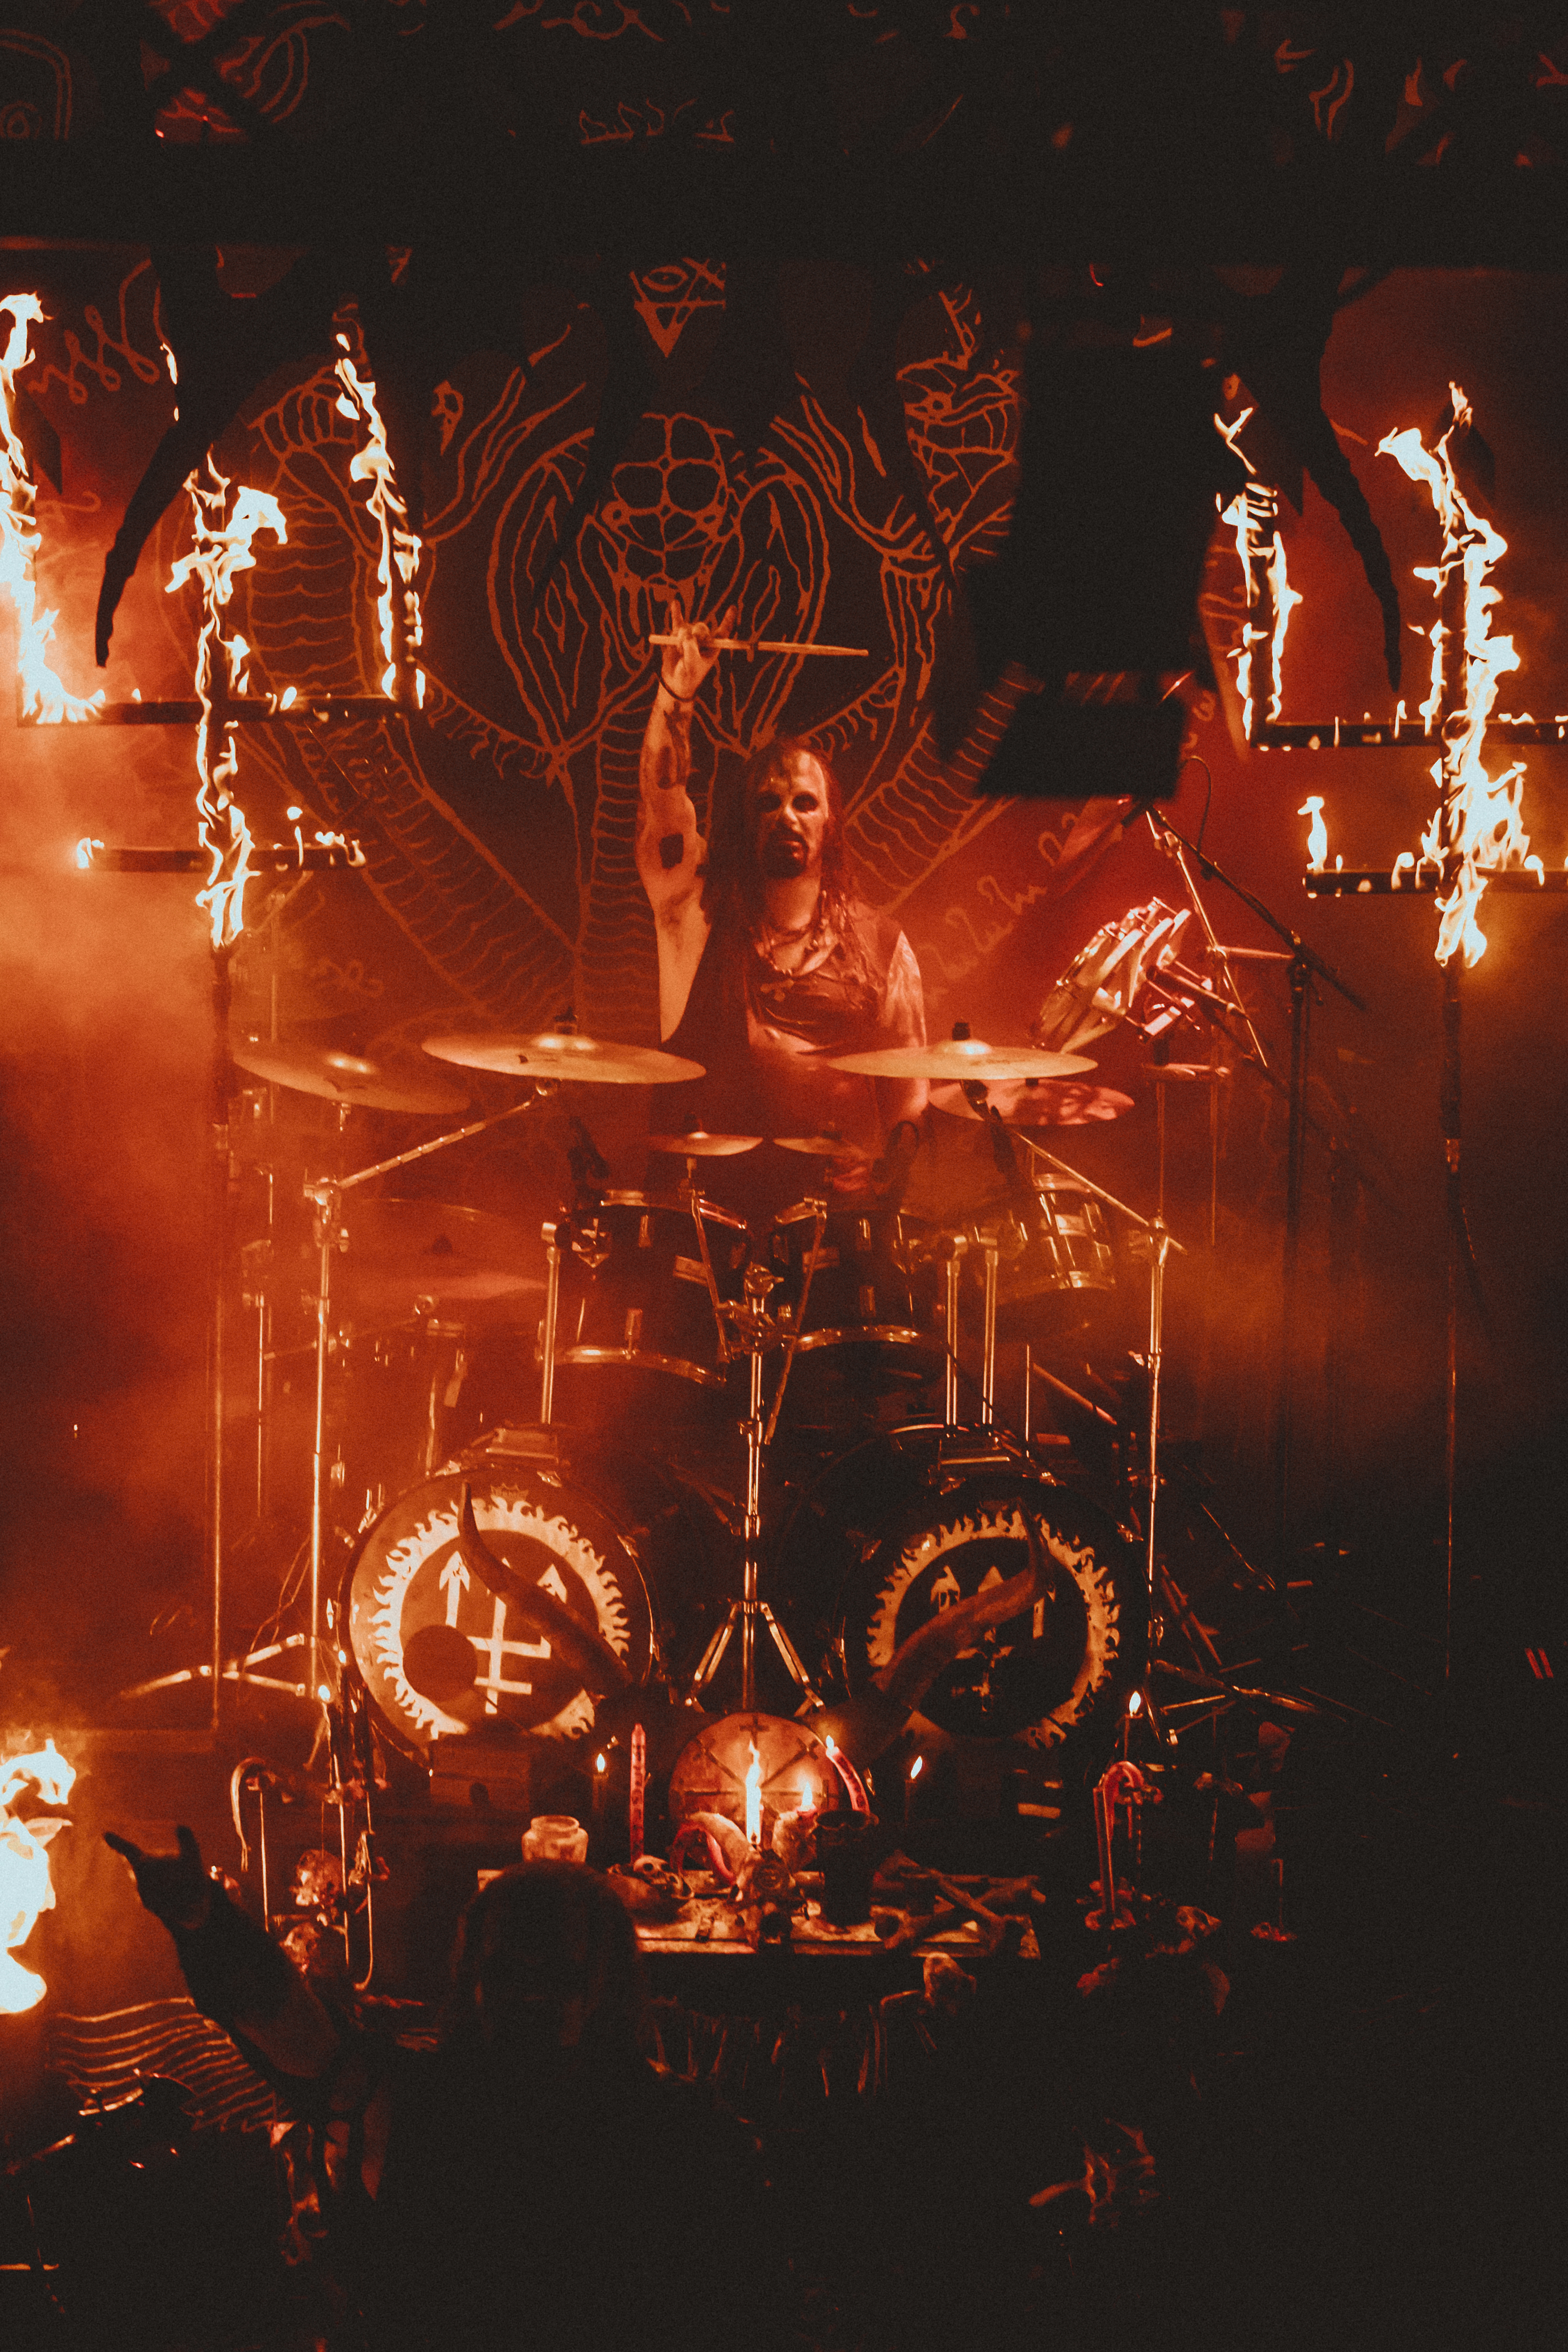 WATAIN - New Live Album "Die In Fire - Live In Hell" Out Now!